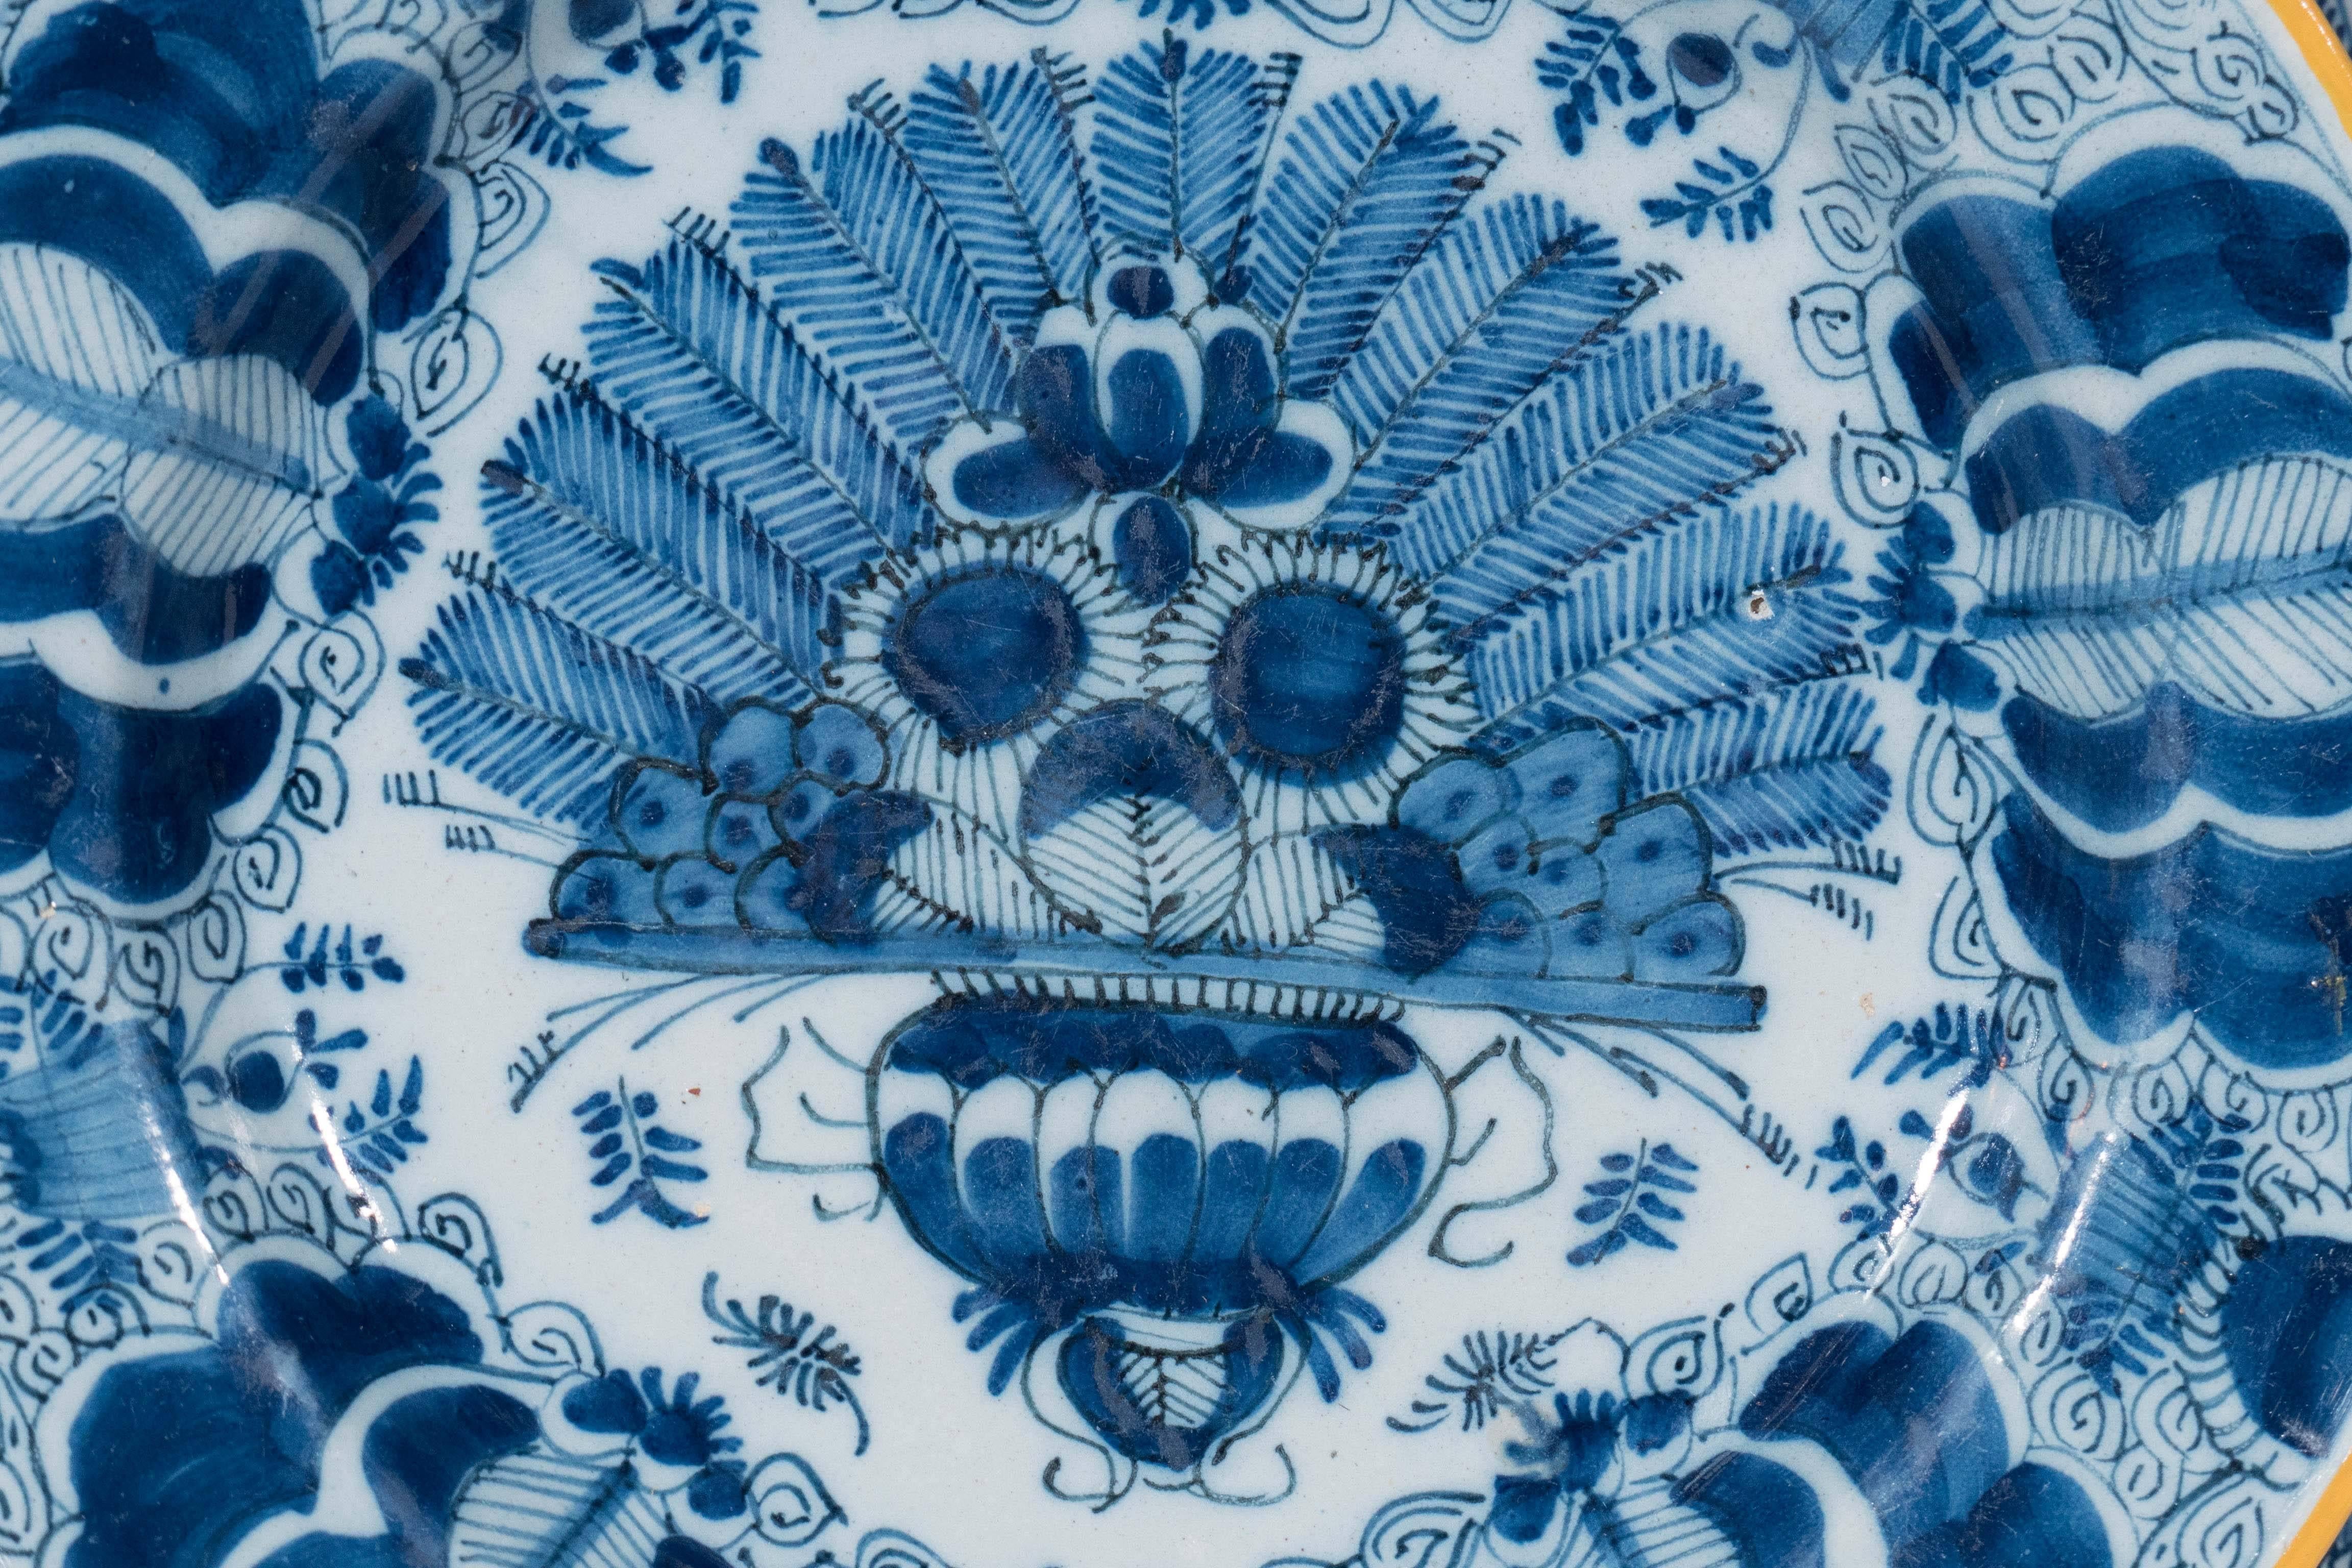 We now have three of these Dutch delft chargers showing a vase filled with sunflowers and ferns. The design is reminiscent of a peacock and is known as the 